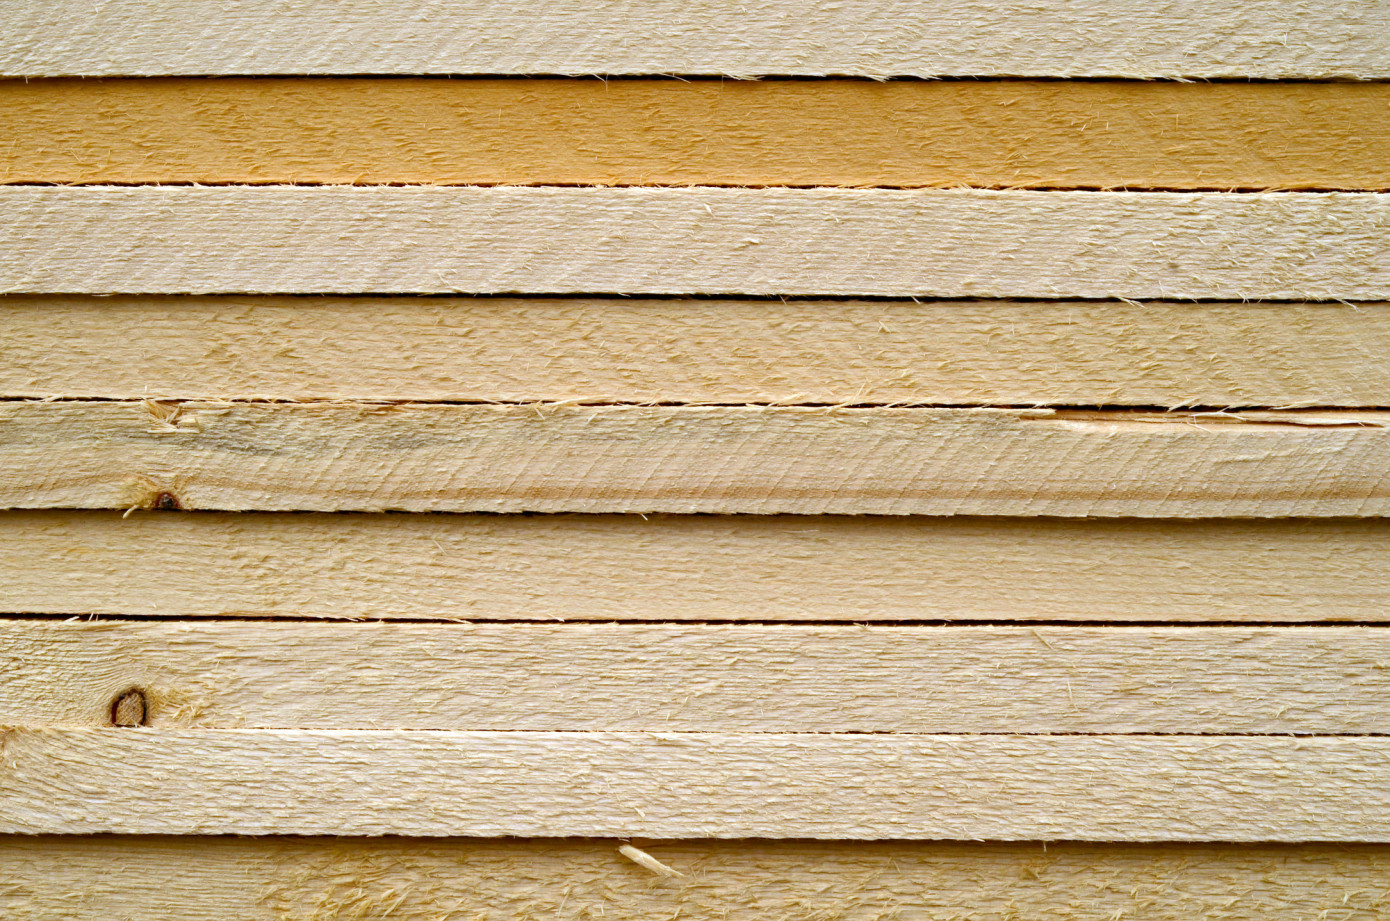 In April, price for lumber exported from Thailand to China rises 3%